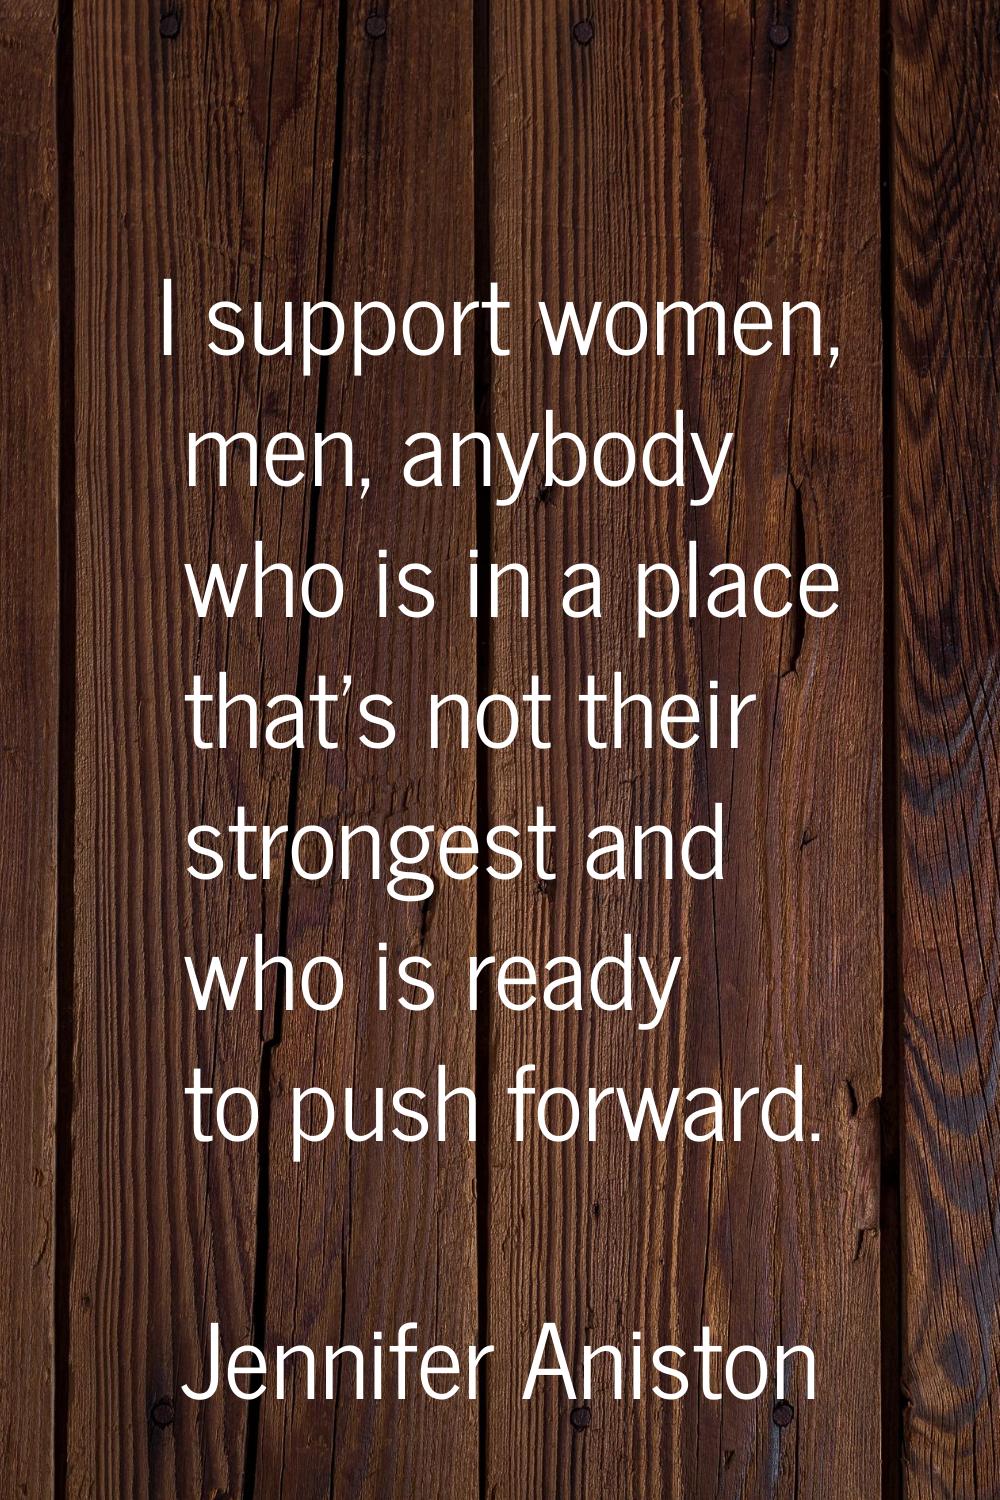 I support women, men, anybody who is in a place that's not their strongest and who is ready to push